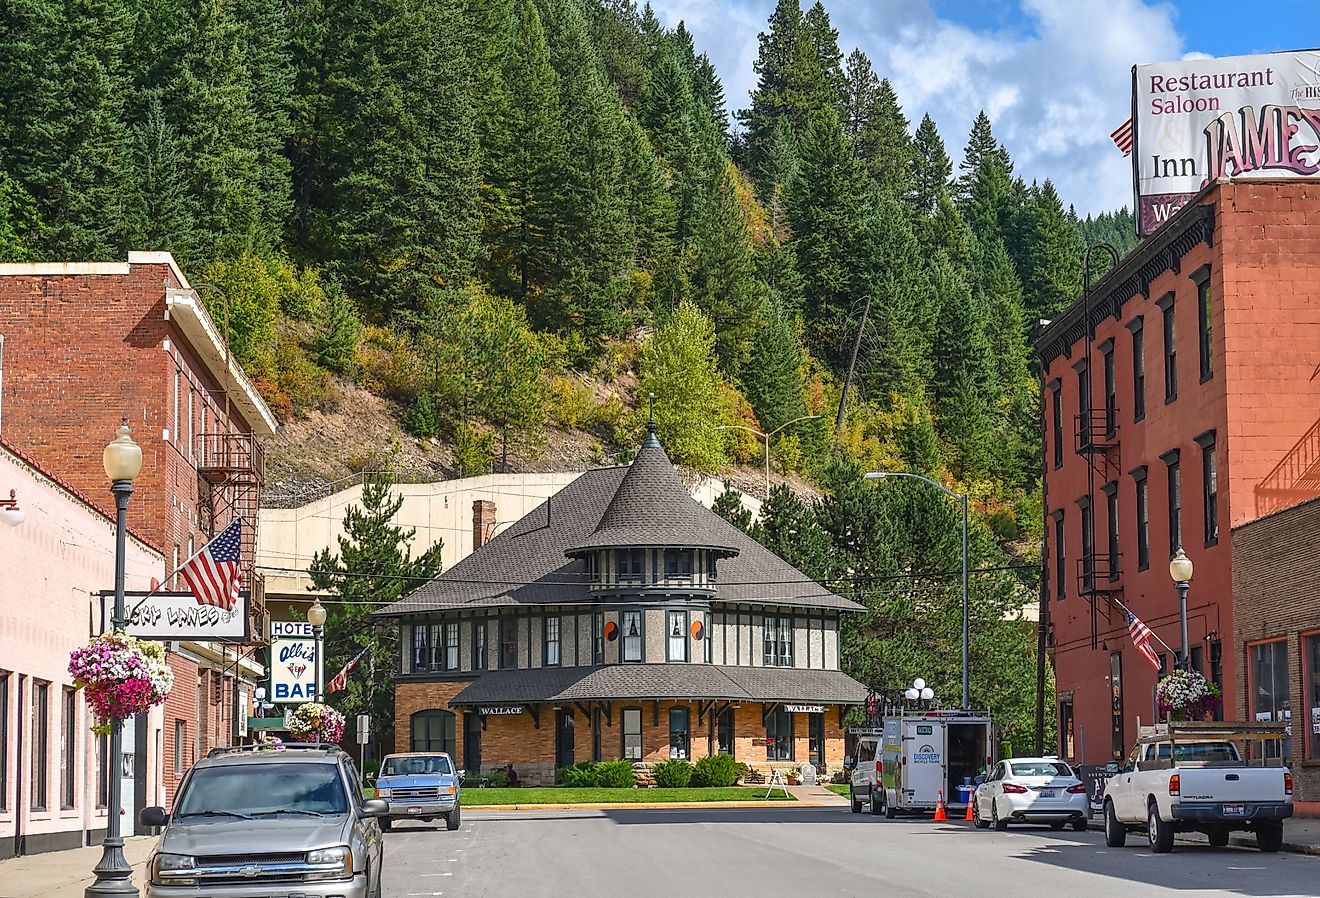 10 Oldest Founded Small Towns to Visit in Idaho